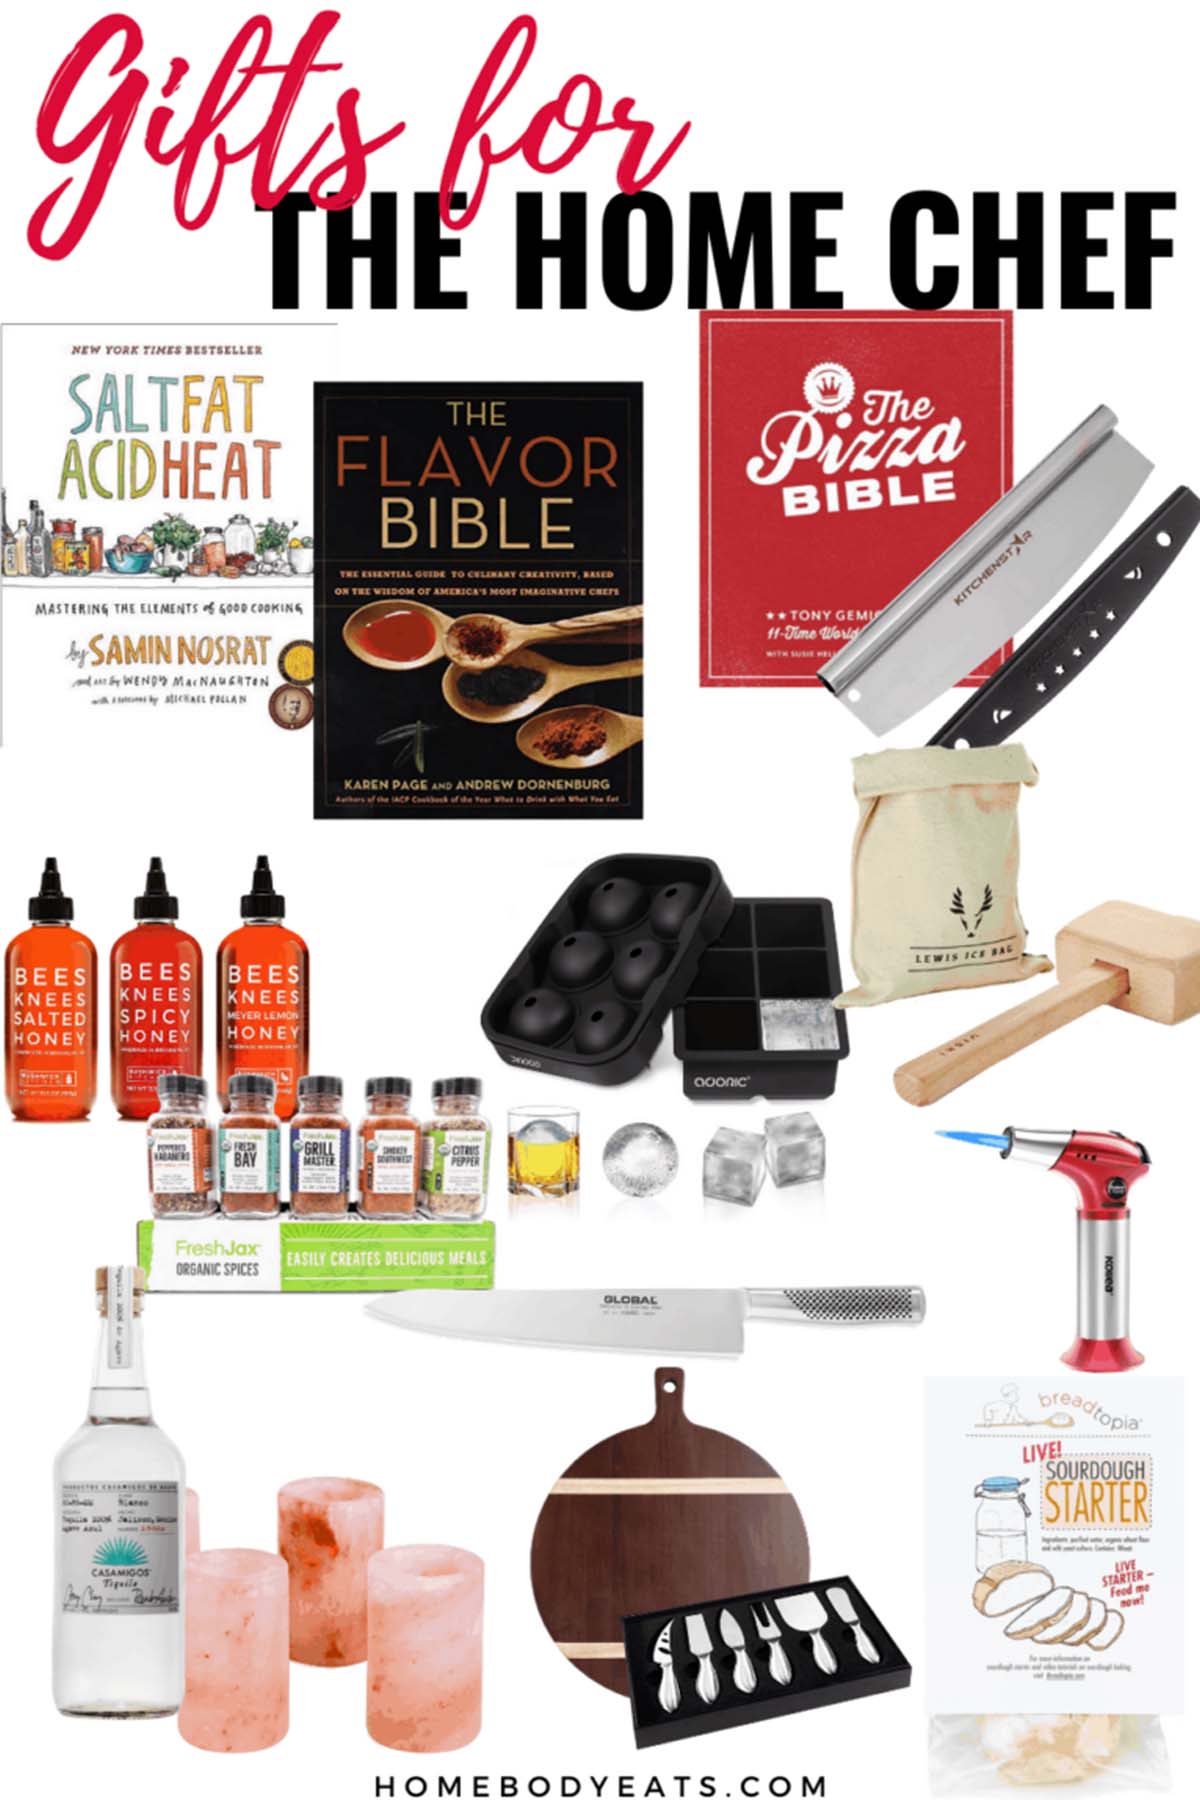 10 Surprisingly Unusual Cooking Themed Gifts for the Home Chef